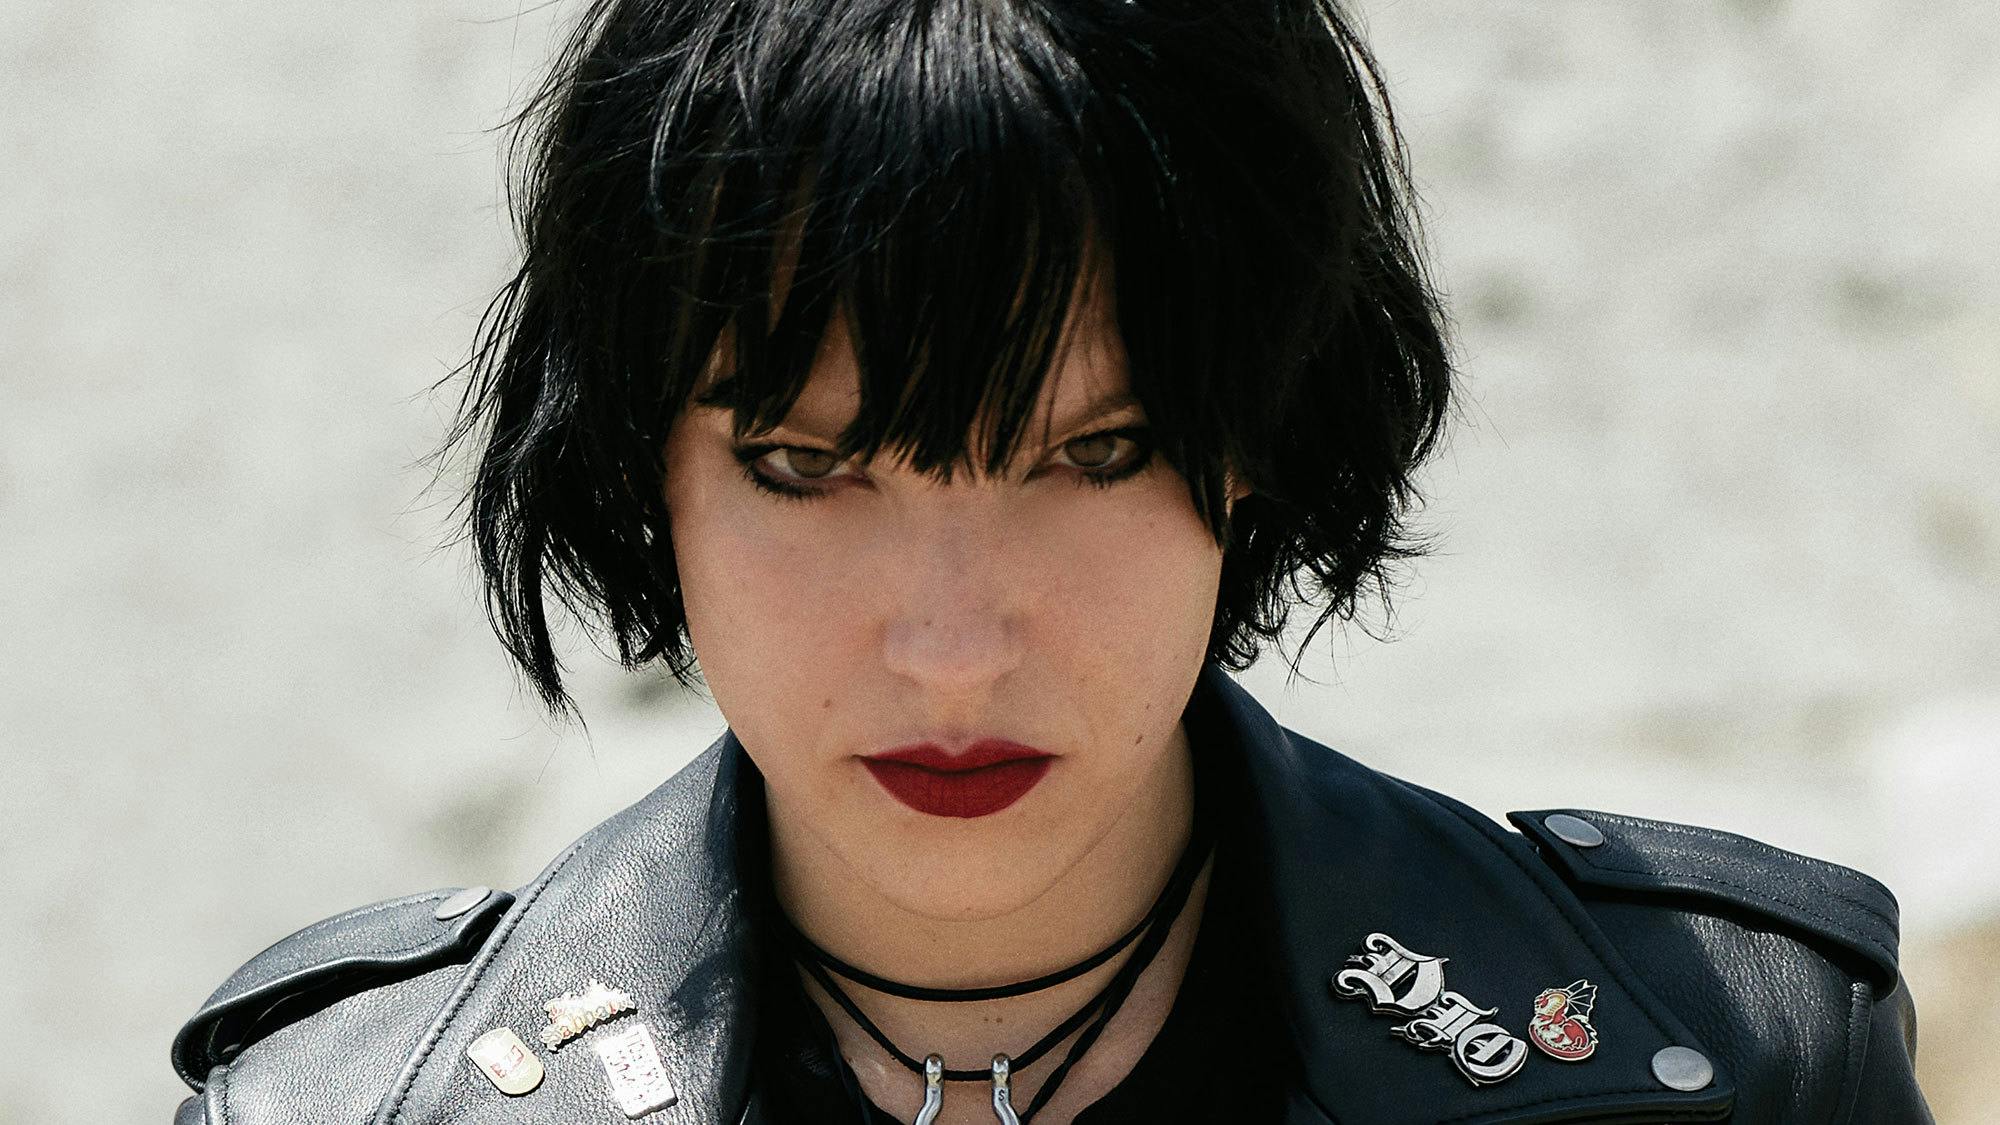 Halestorm’s Lzzy Hale: The 10 songs that changed my life